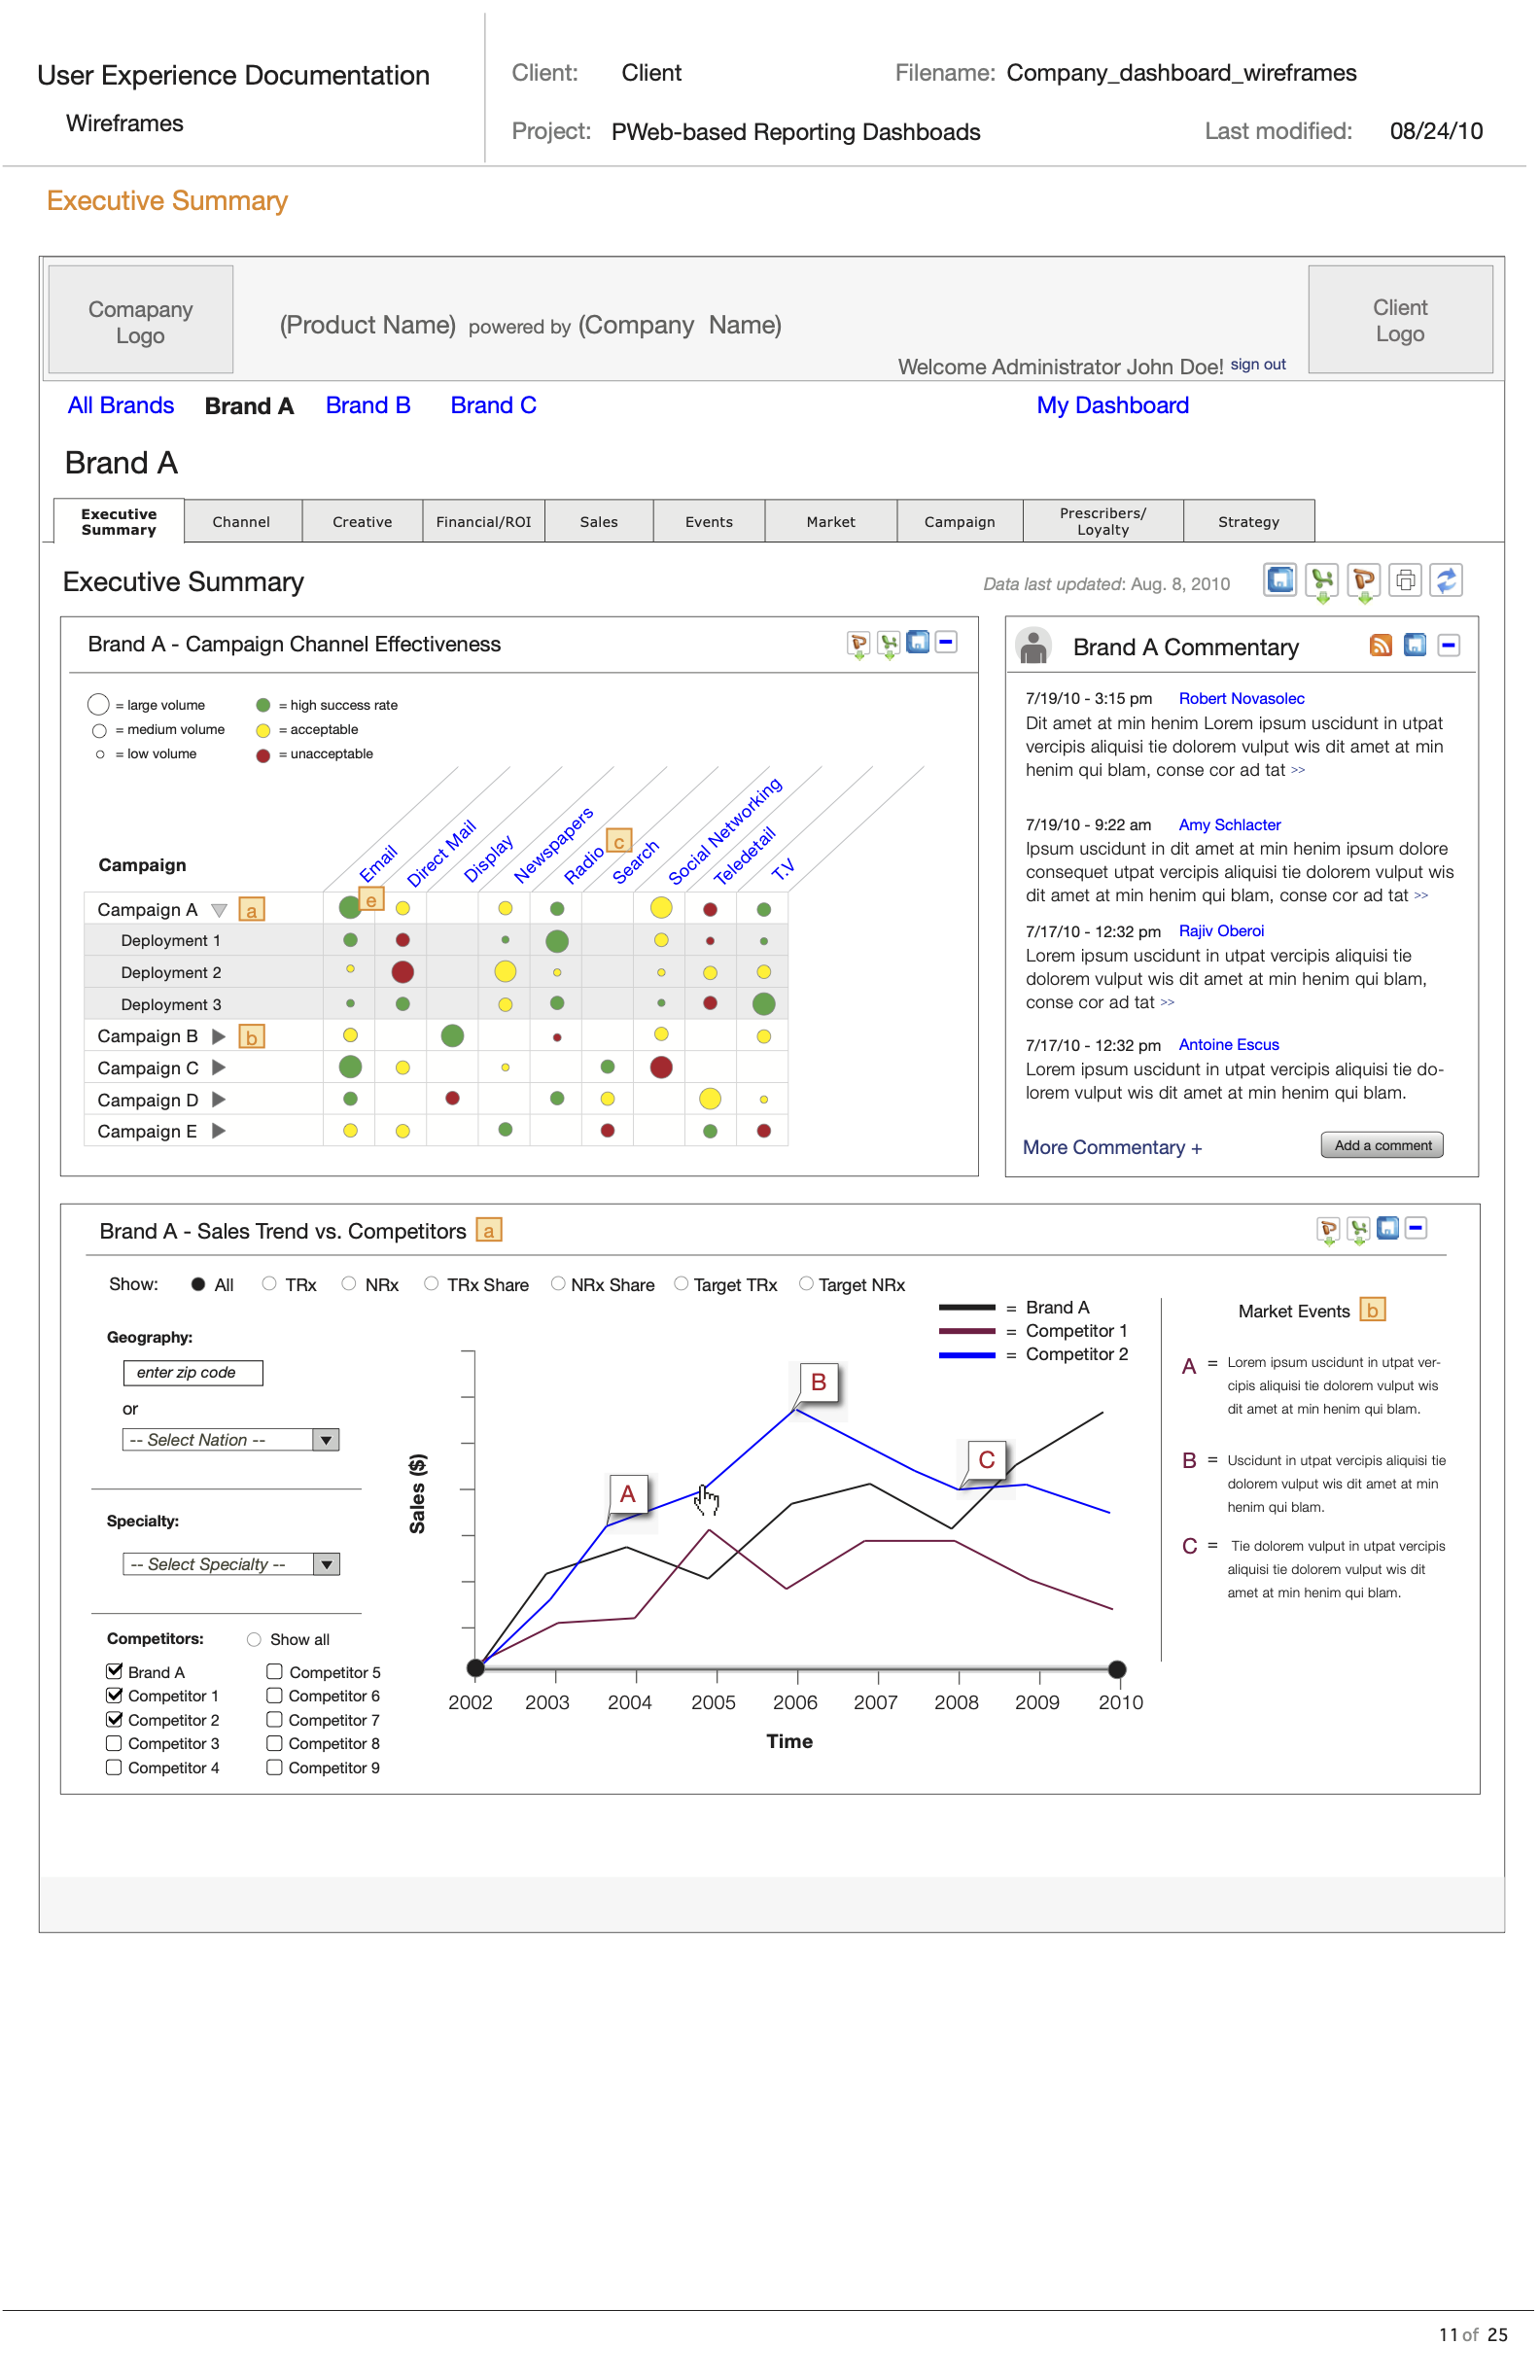 Desktop-sized wireframe of a company dashboard screen with colorful graphs